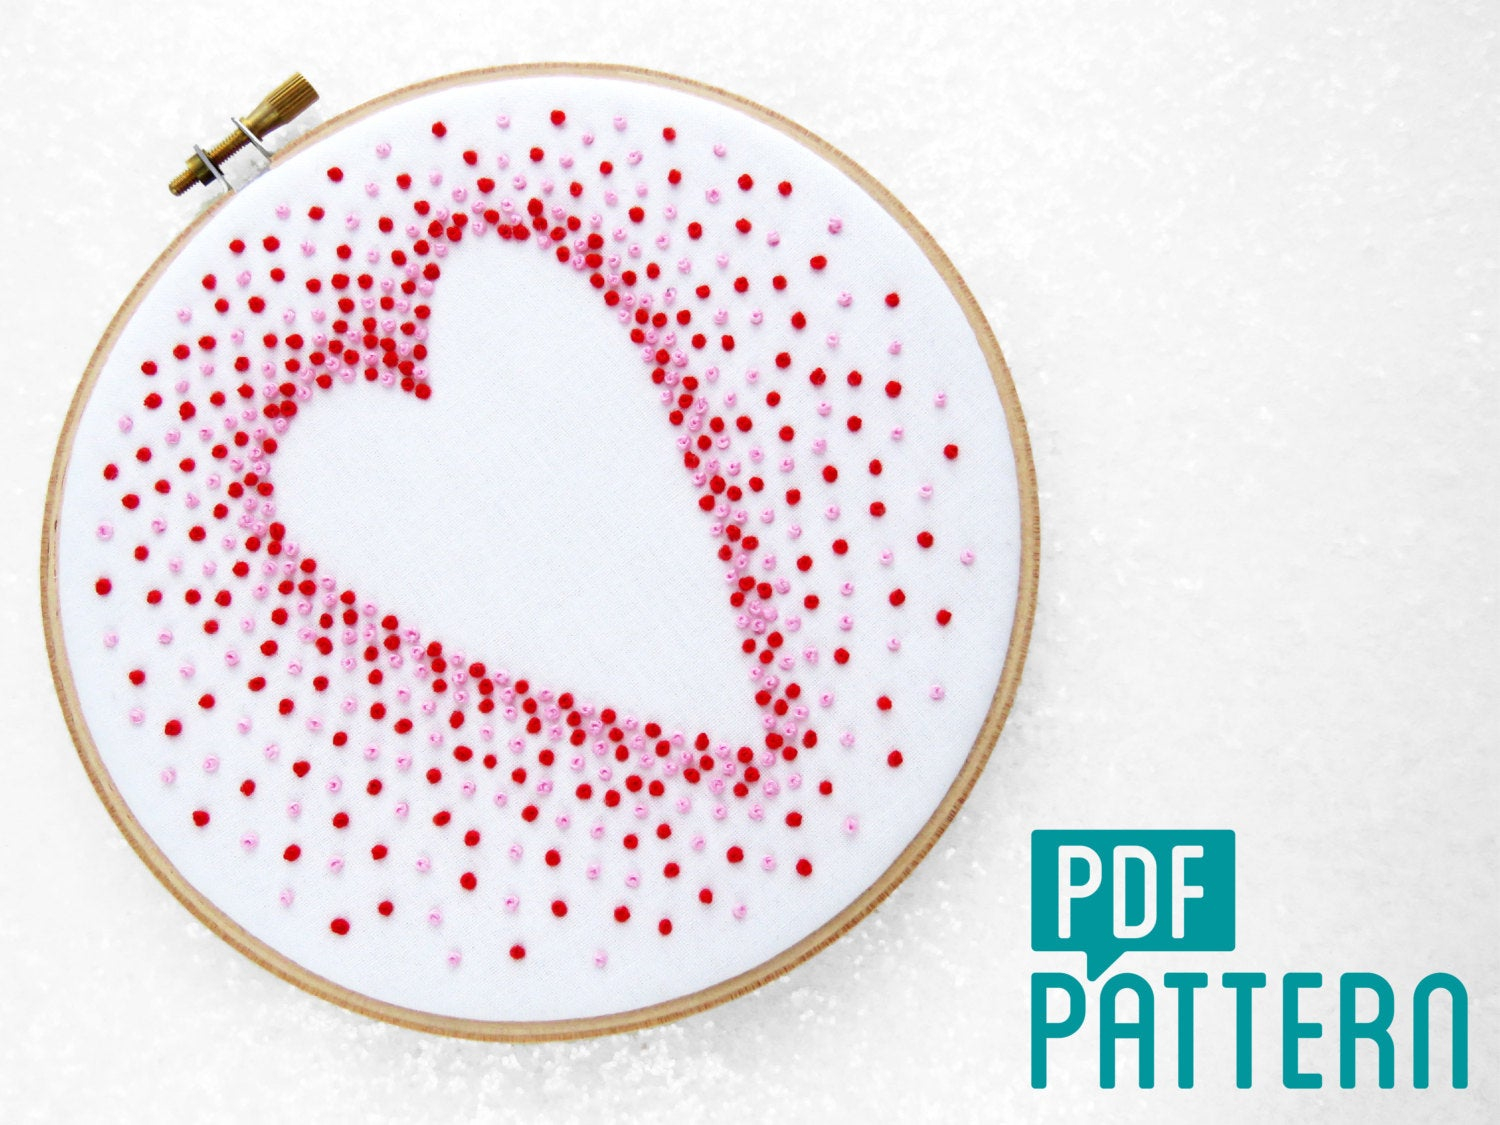 French Knot Embroidery Patterns French Knot Heart Embroidery Pattern Modern Needlework Pattern Diy Wedding Gift Diy Anniversay Gift Love Heart Hoop Art Turtorial Pdf